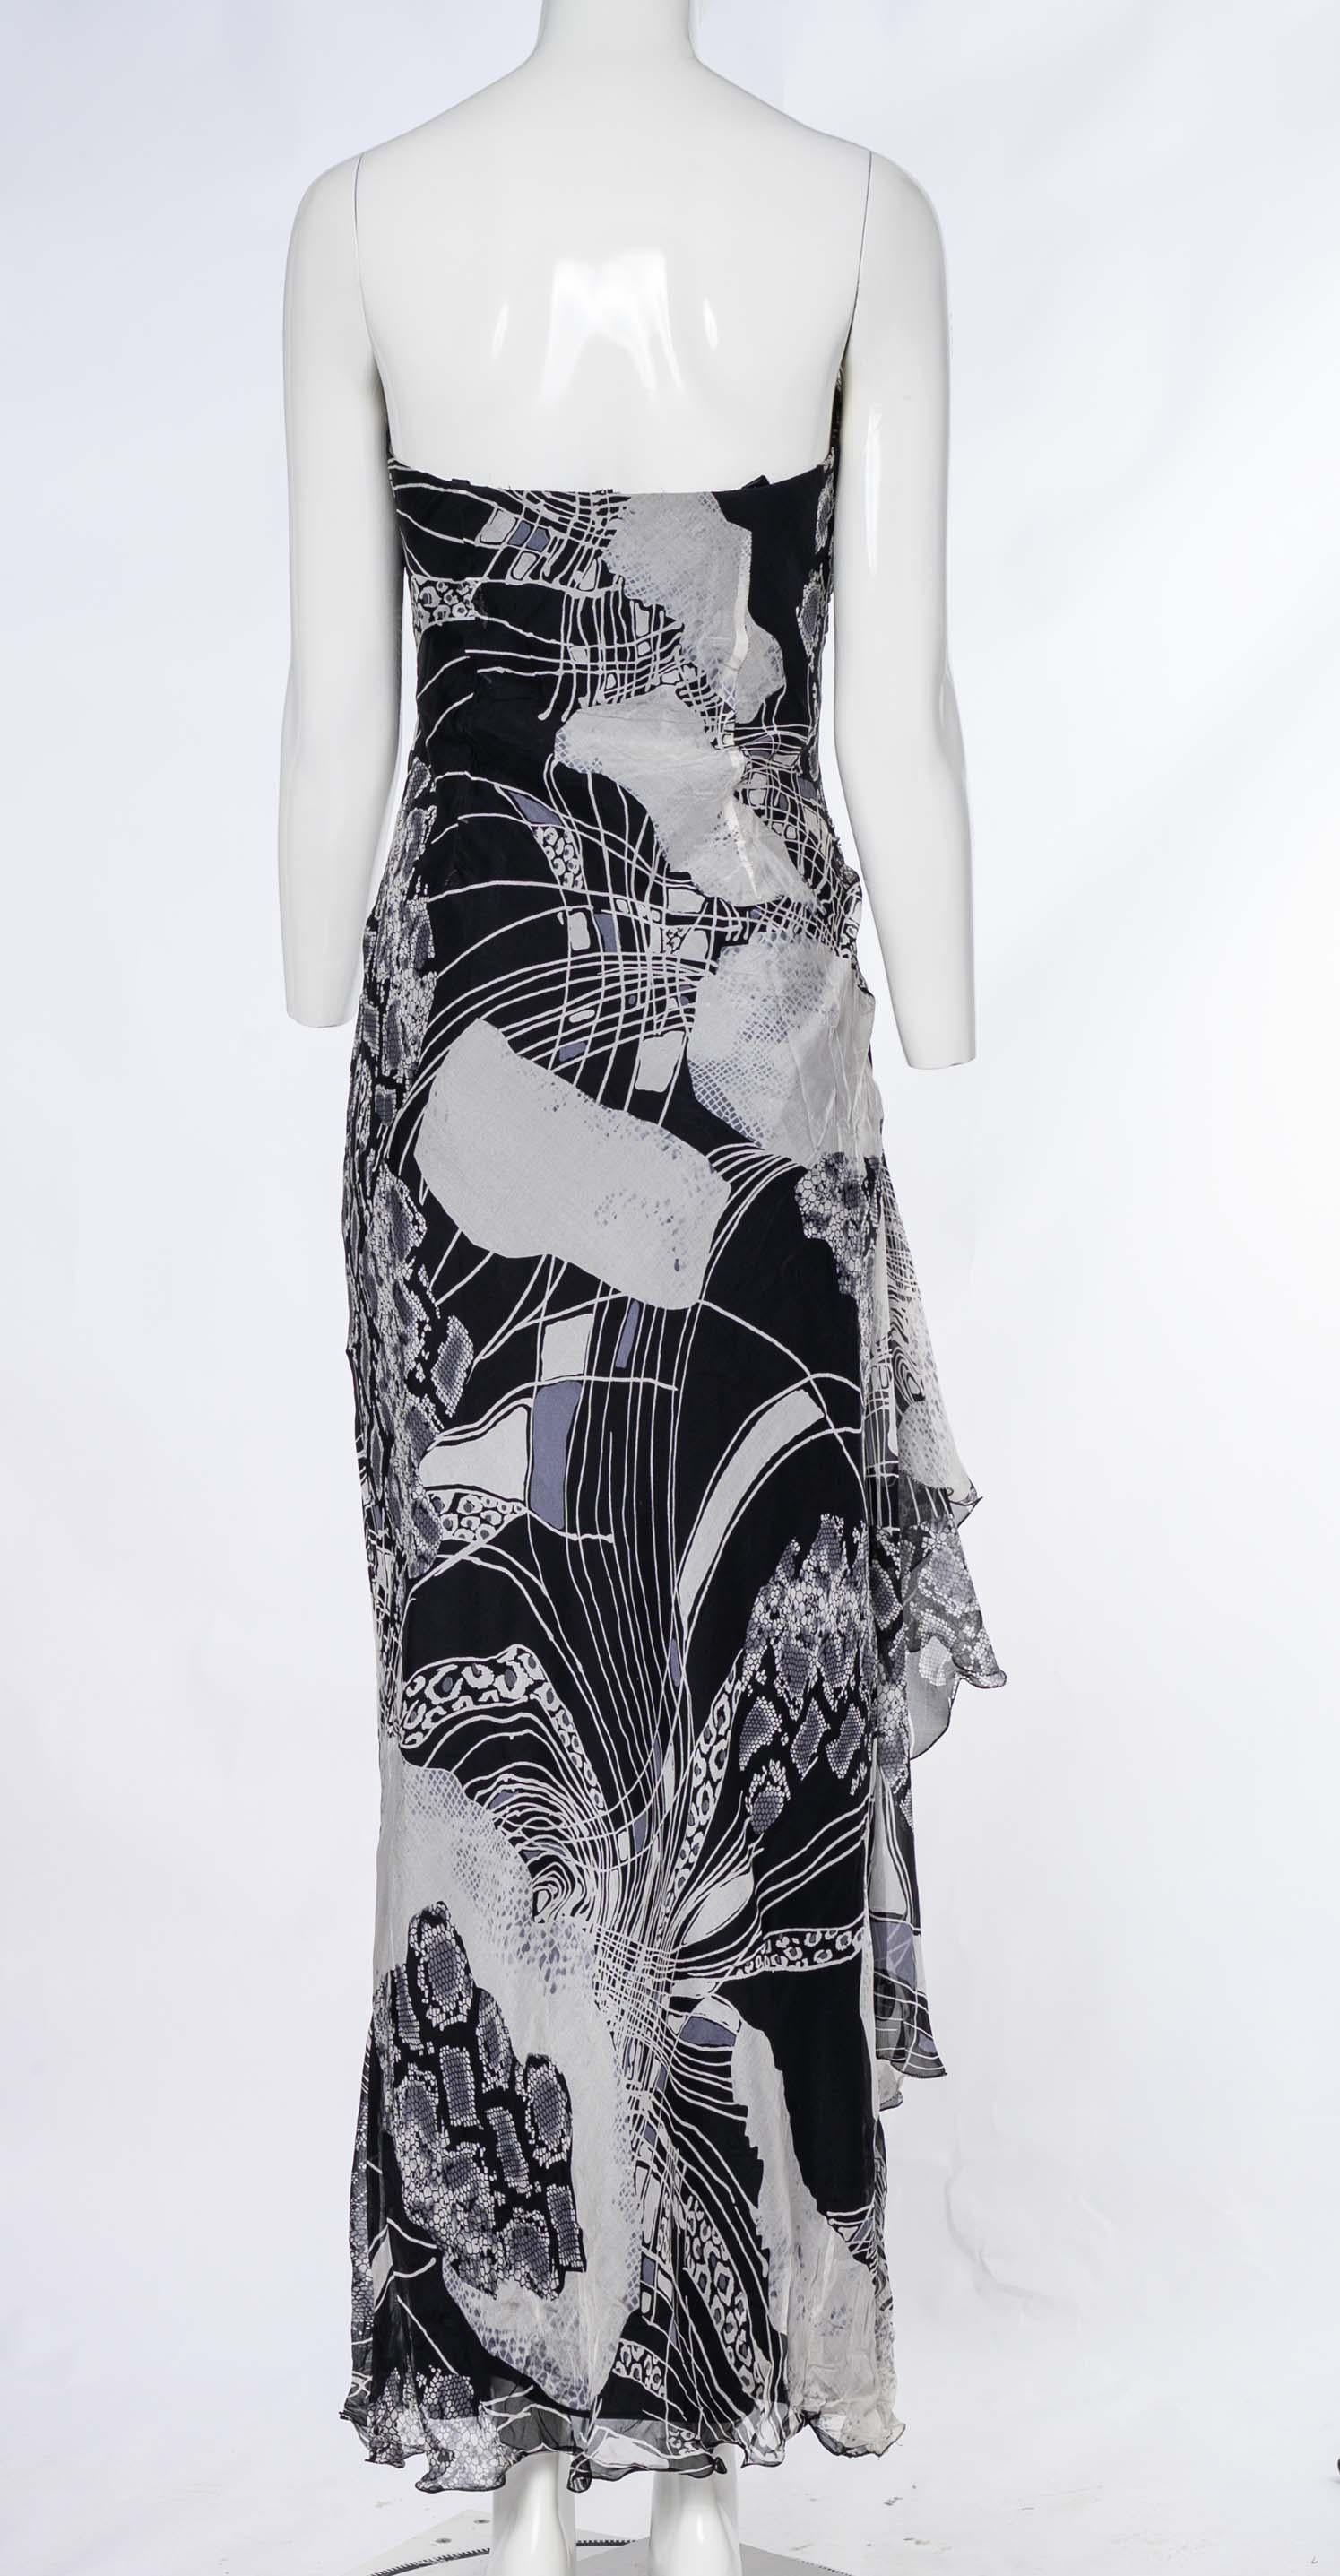 The Diane Freis Monochrome Abstract Print Dress in Black Silk is a chic and sophisticated piece that showcases a captivating abstract print. Crafted from luxurious black silk, this strapless dress features a sweetheart neckline, adding a touch of